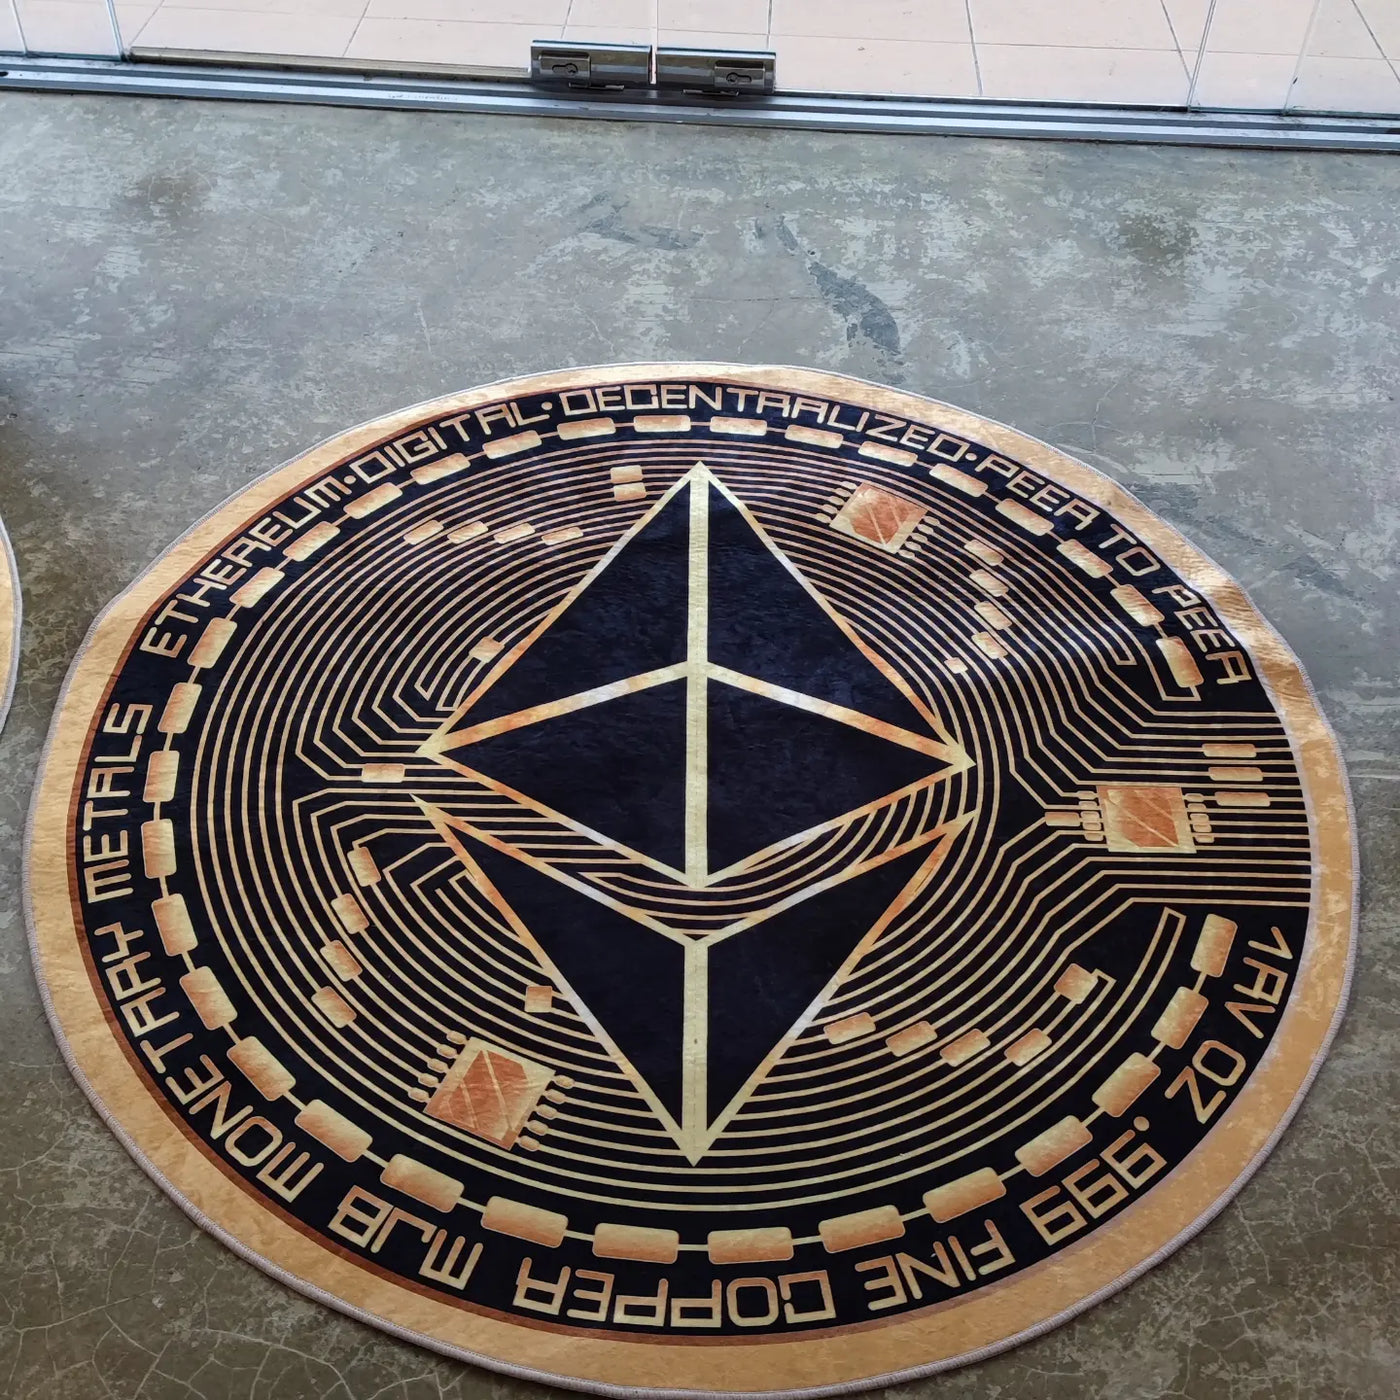 Ethereum mat. Imagine you are literally on top of Ethereum. Be in control. Introducing our Ethereum floor mat that glitters under the sun, reflective, gold, stunning. 